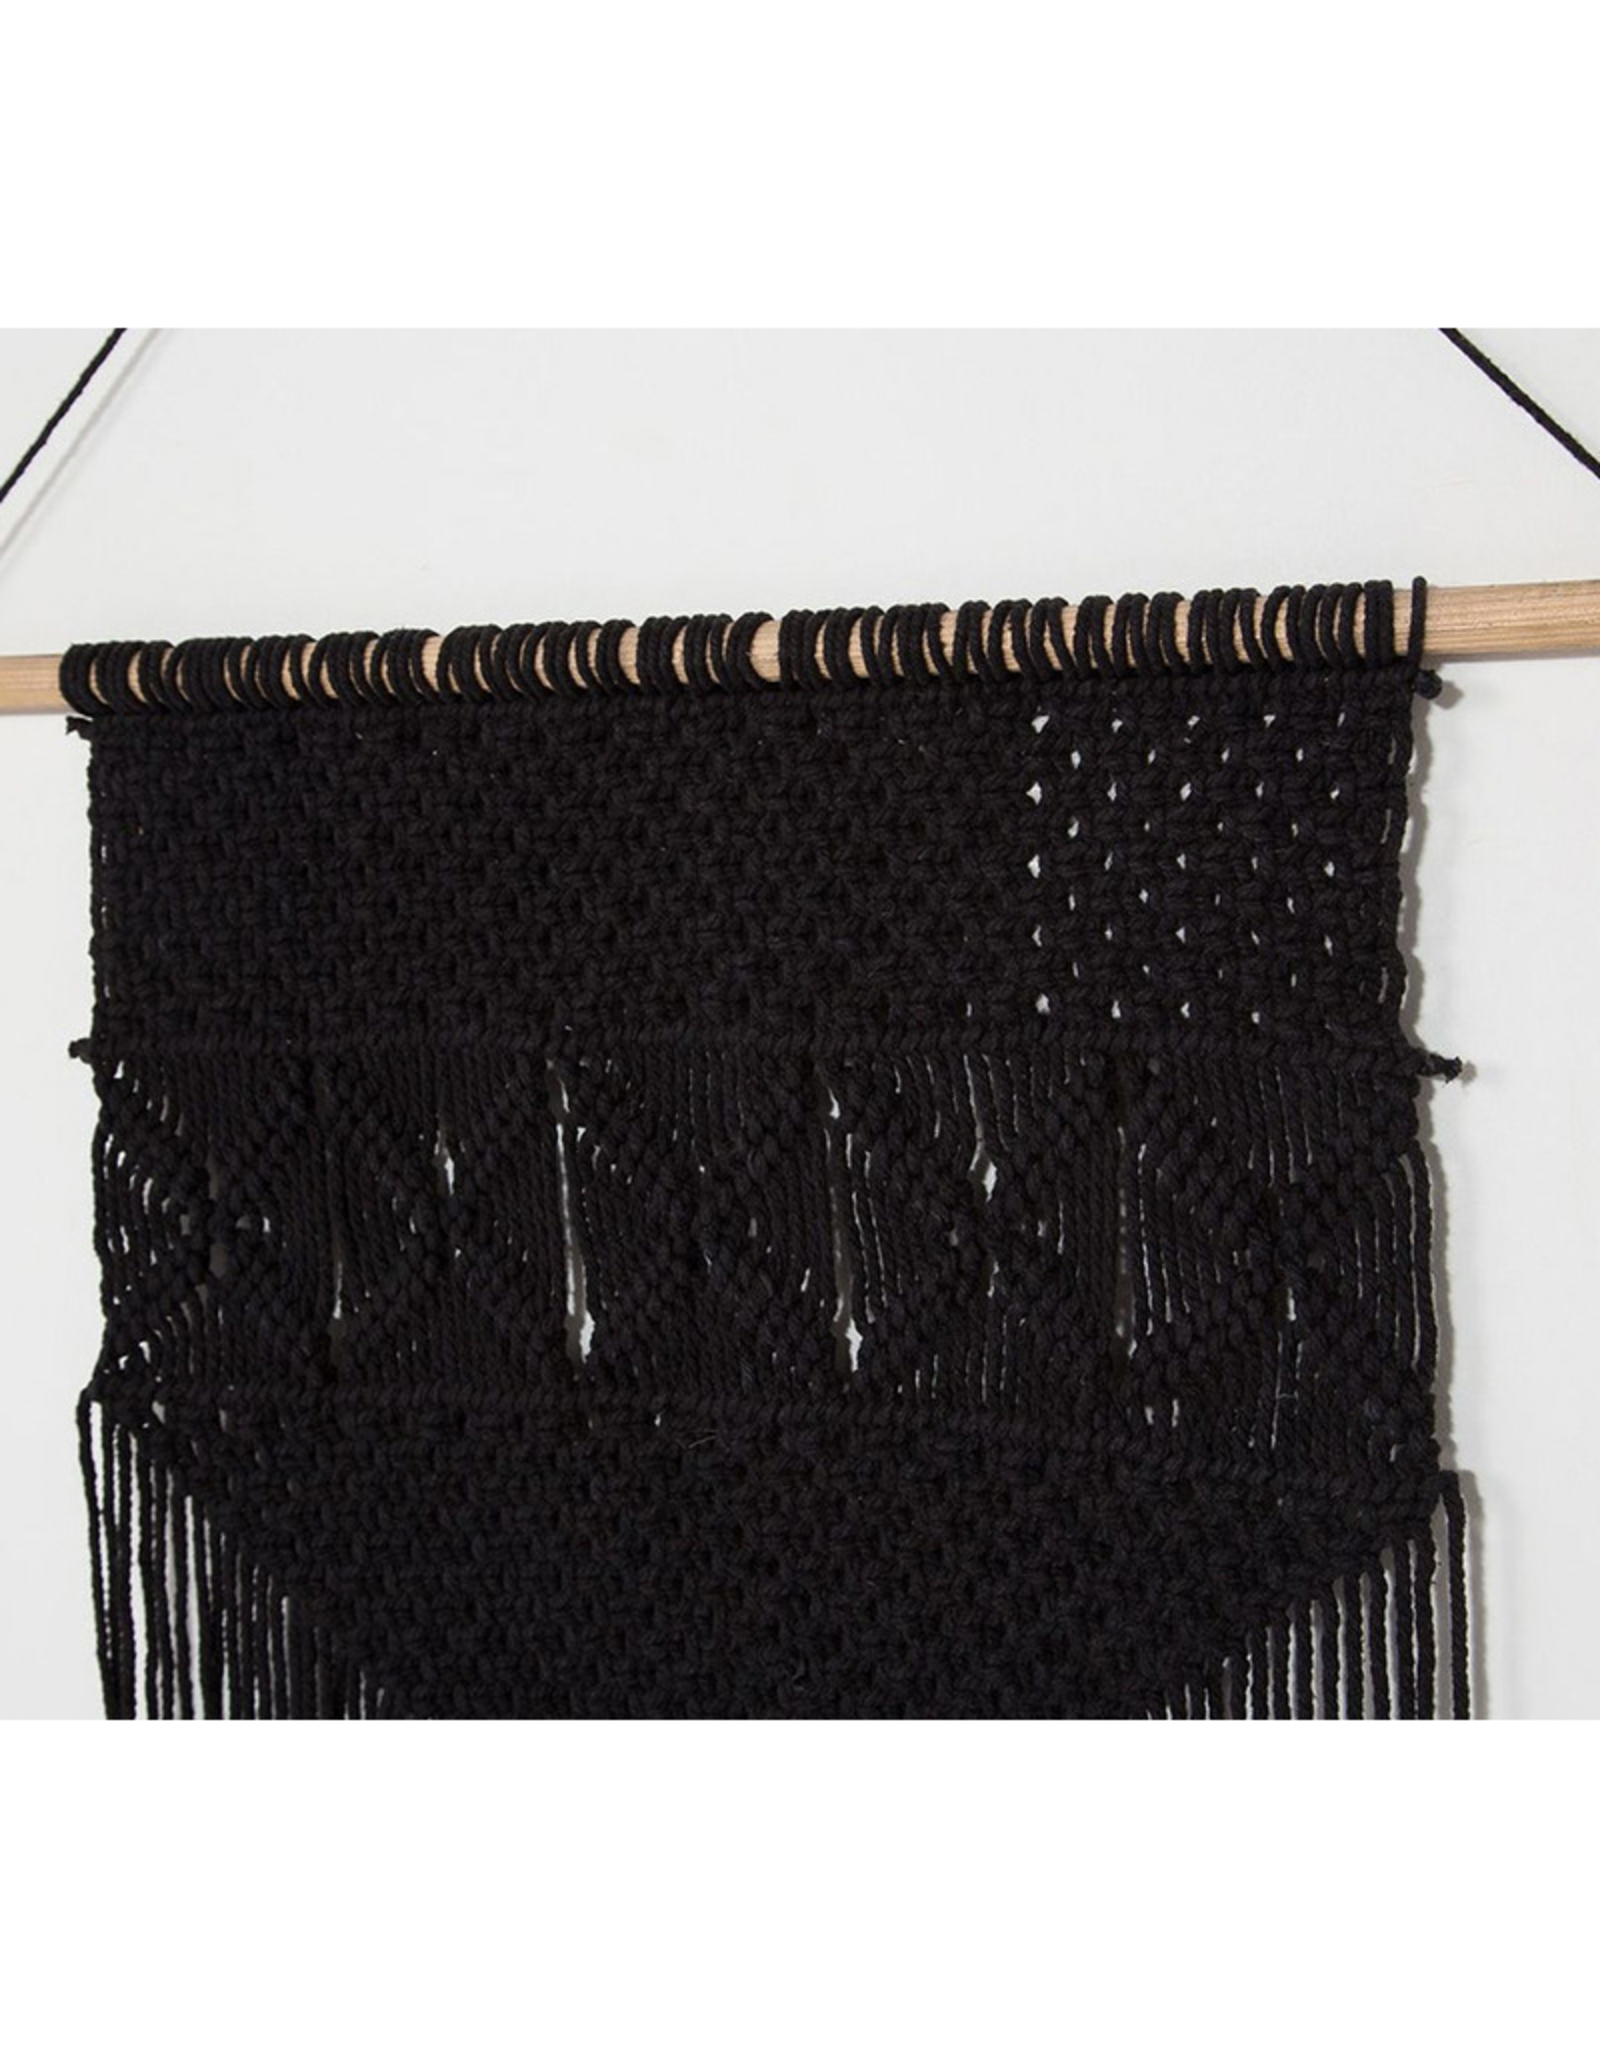 Style In Form Wall Decor SIF Rio Macrame Hanging Black BOH-042